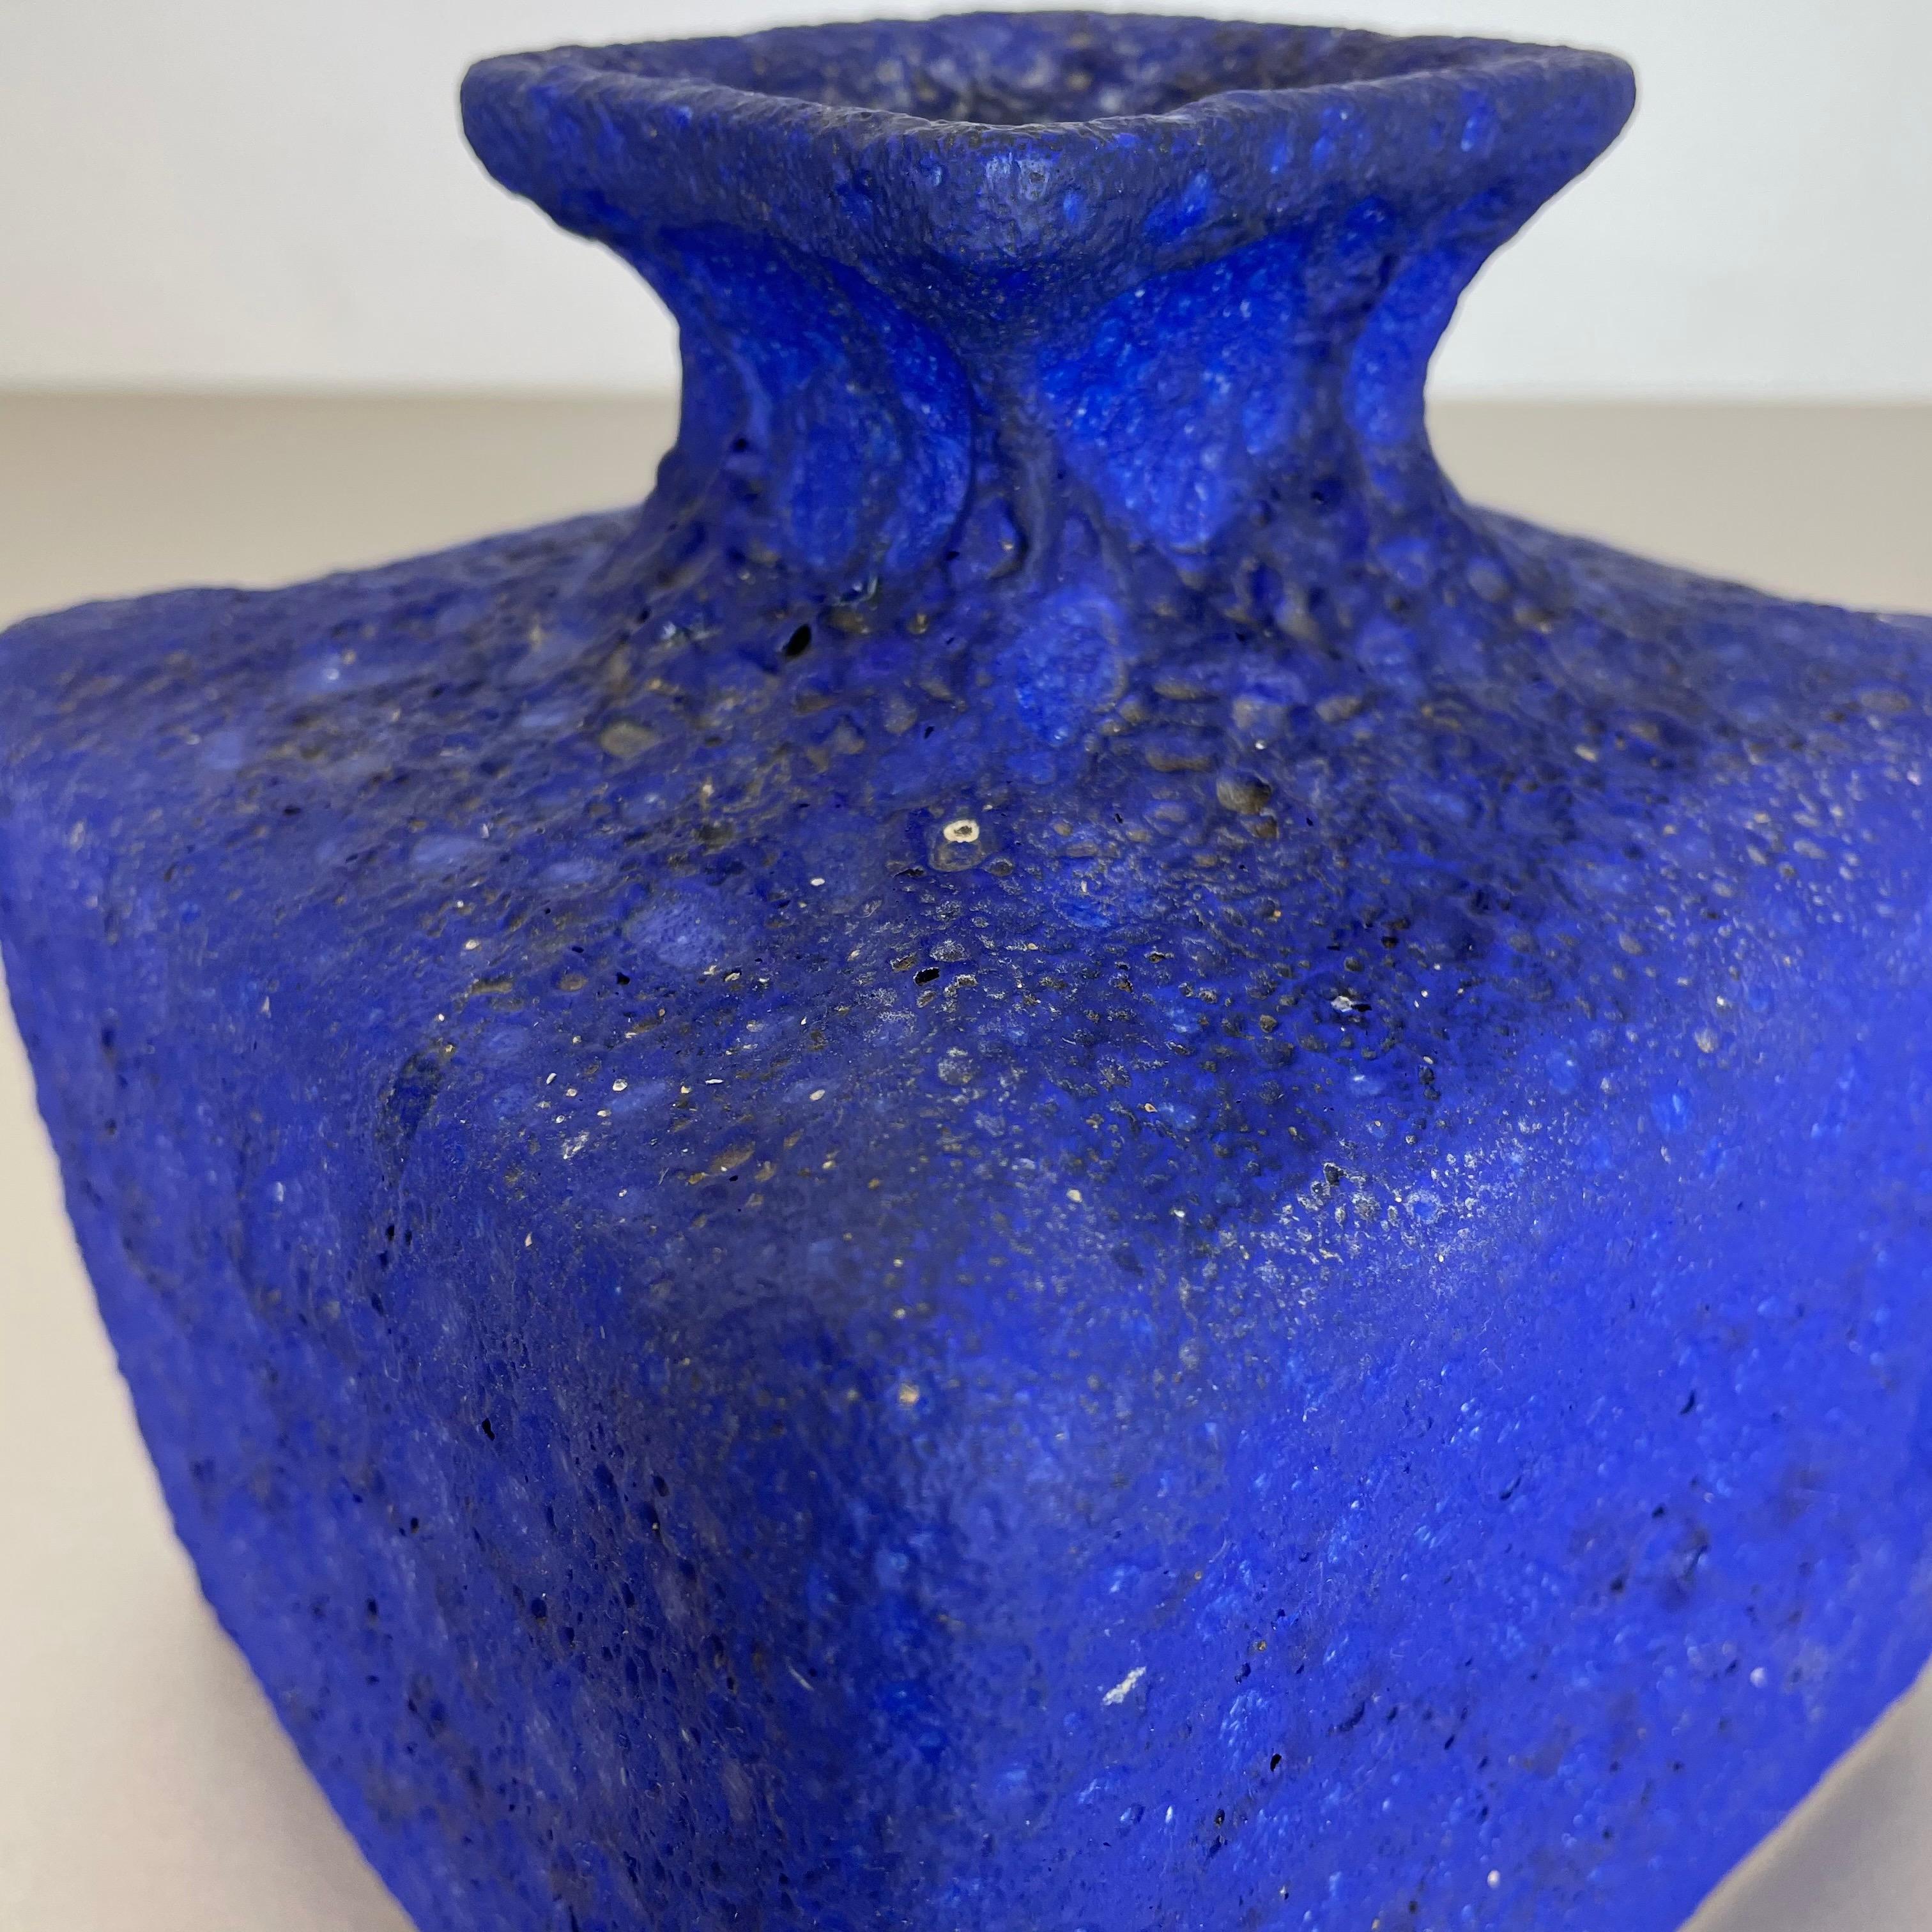 20th Century Abstract Colorful Pottery Blue Cube Vase Made by Silberdistel, W. Germany, 1950s